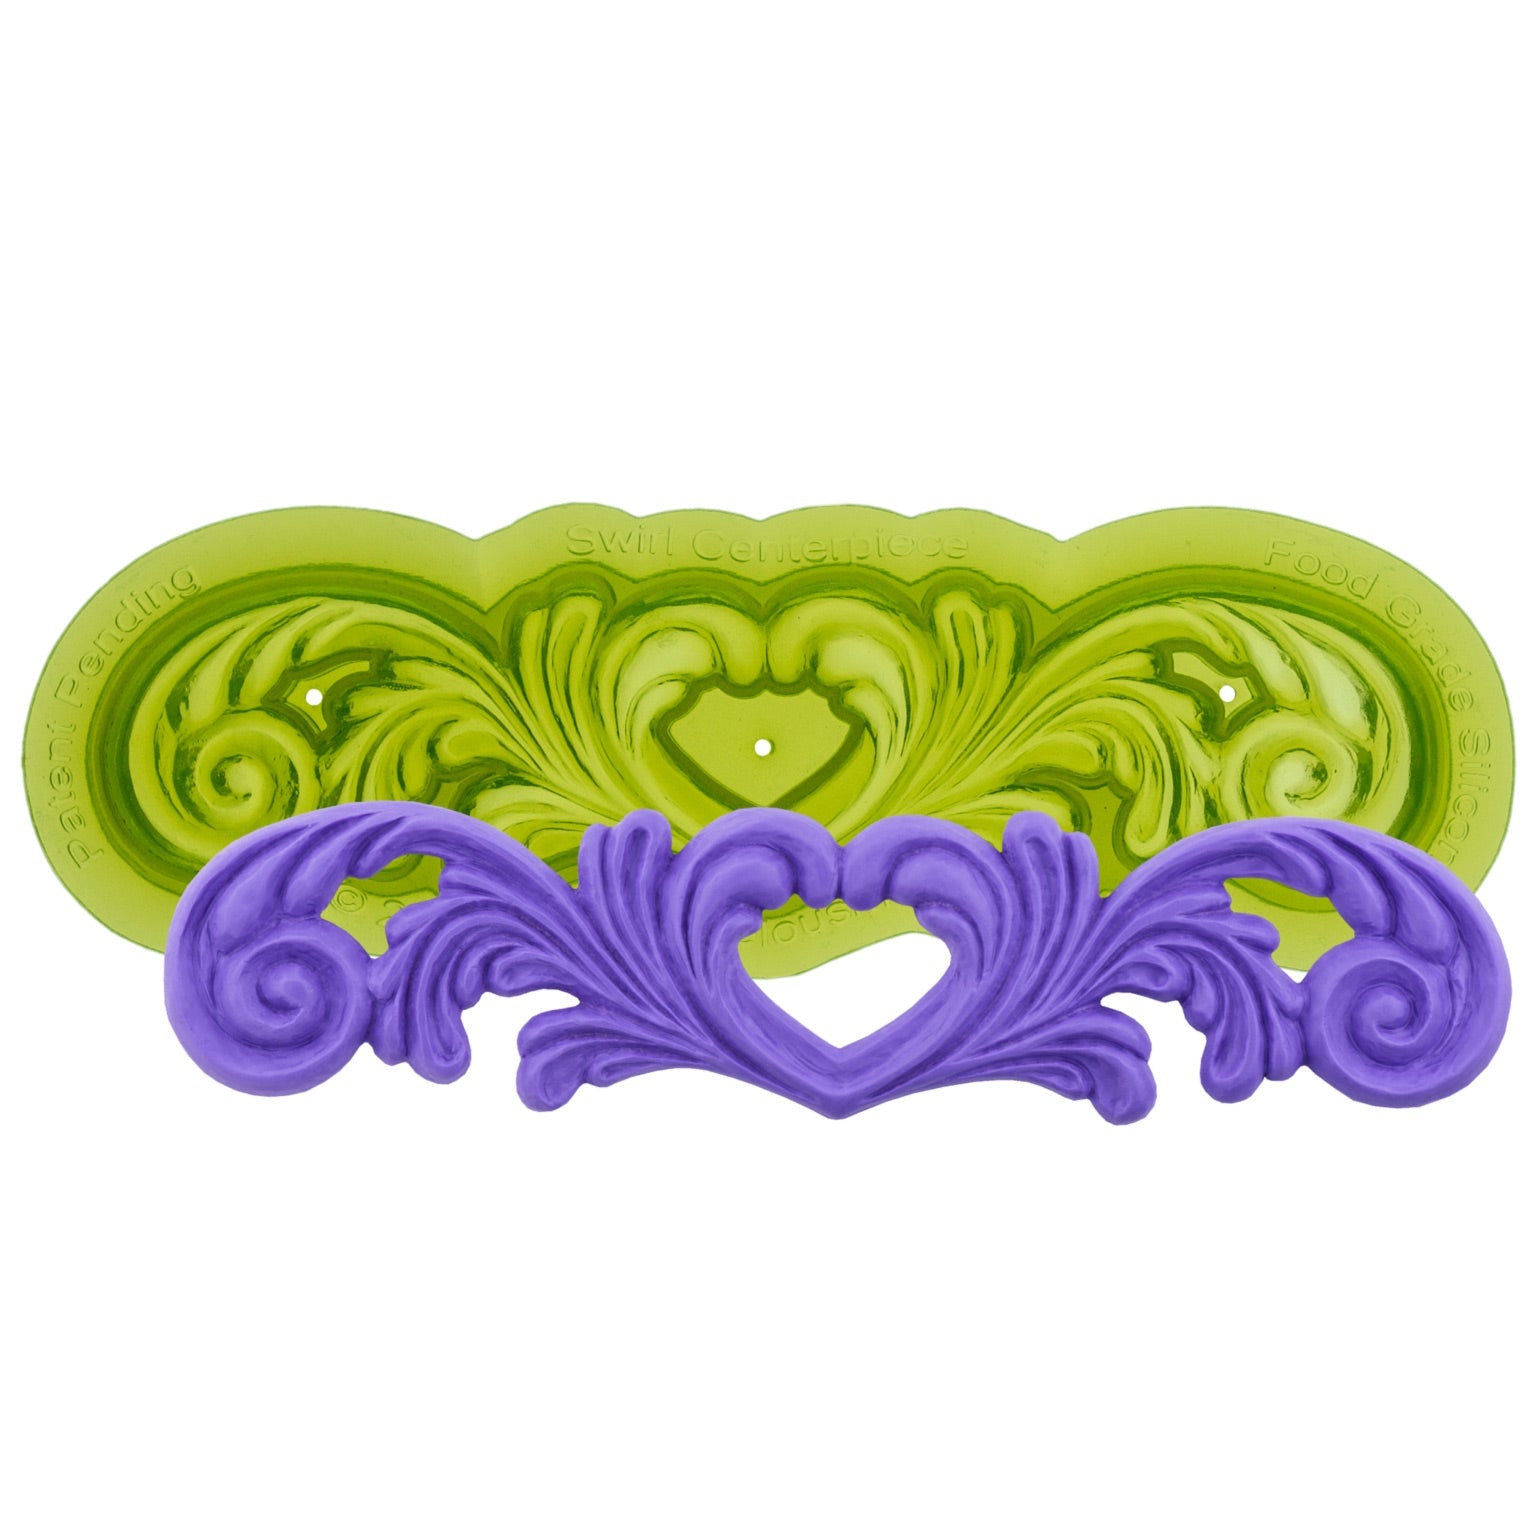 Flourish Centerpiece Silicone Mold for Cake Decorating and DIY Crafts